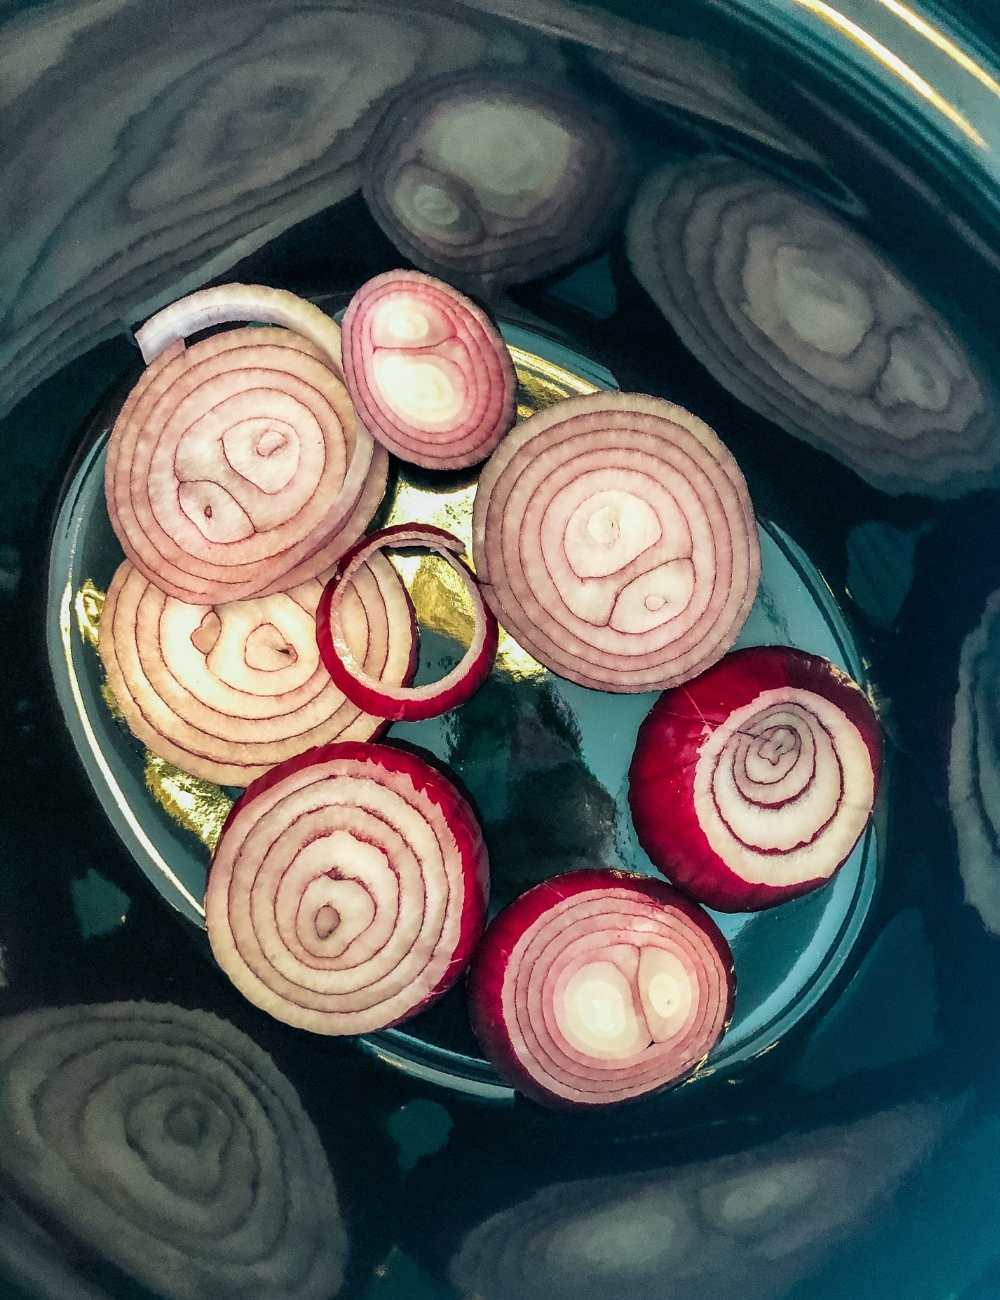 Layer the slow cooker with onions